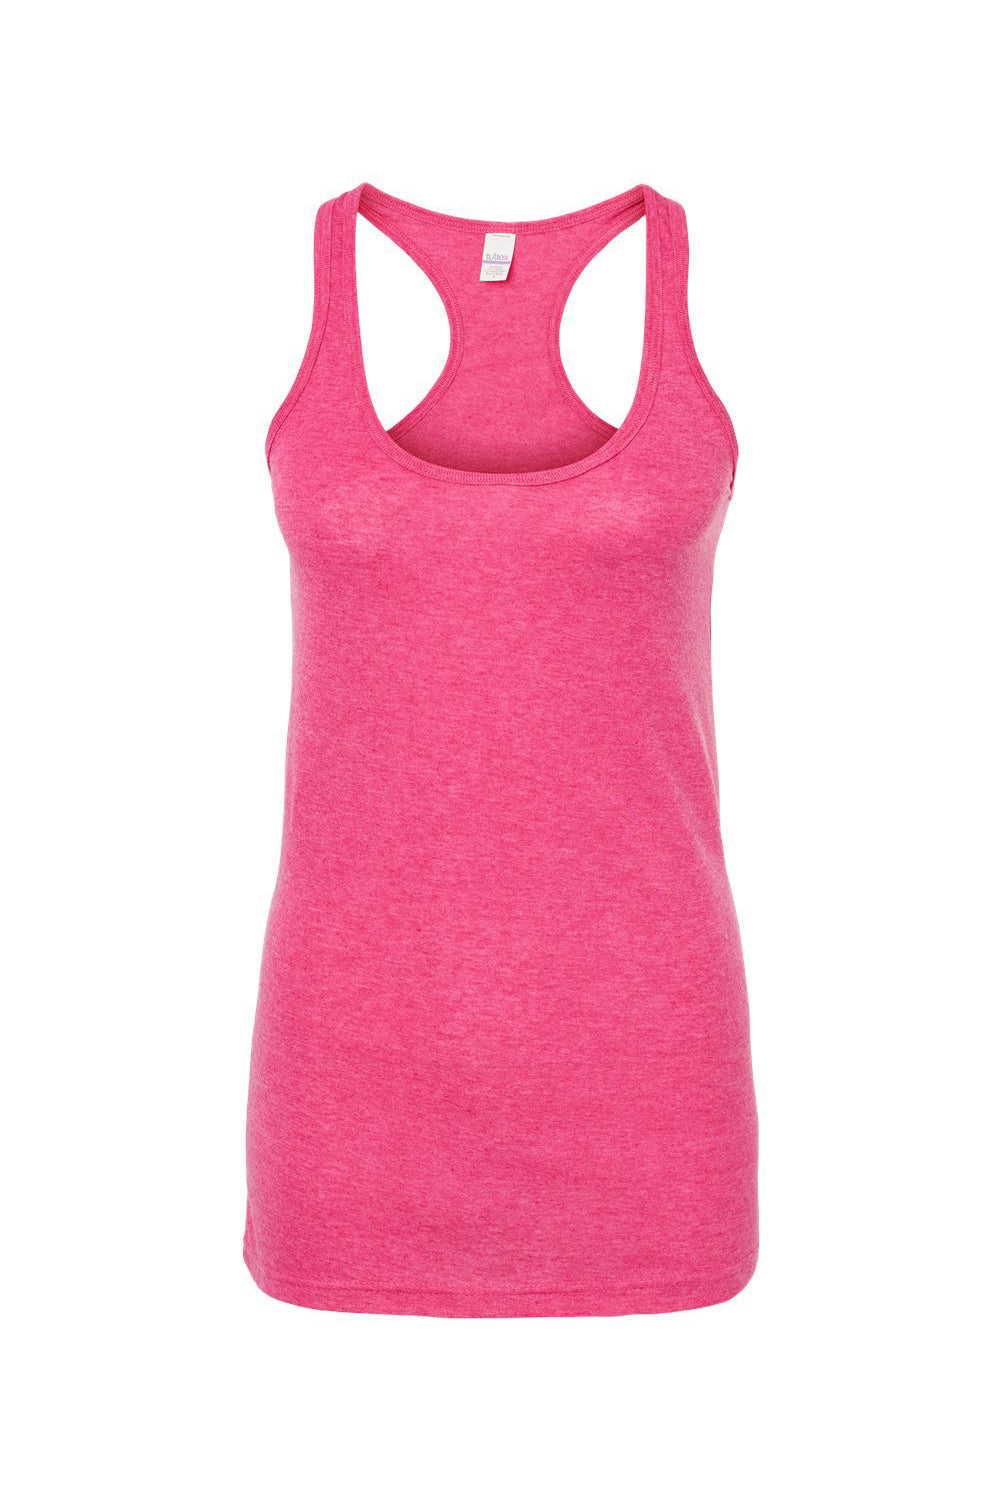 Tultex 190 Womens Poly-Rich Racerback Tank Top Heather Fuchsia Pink Flat Front